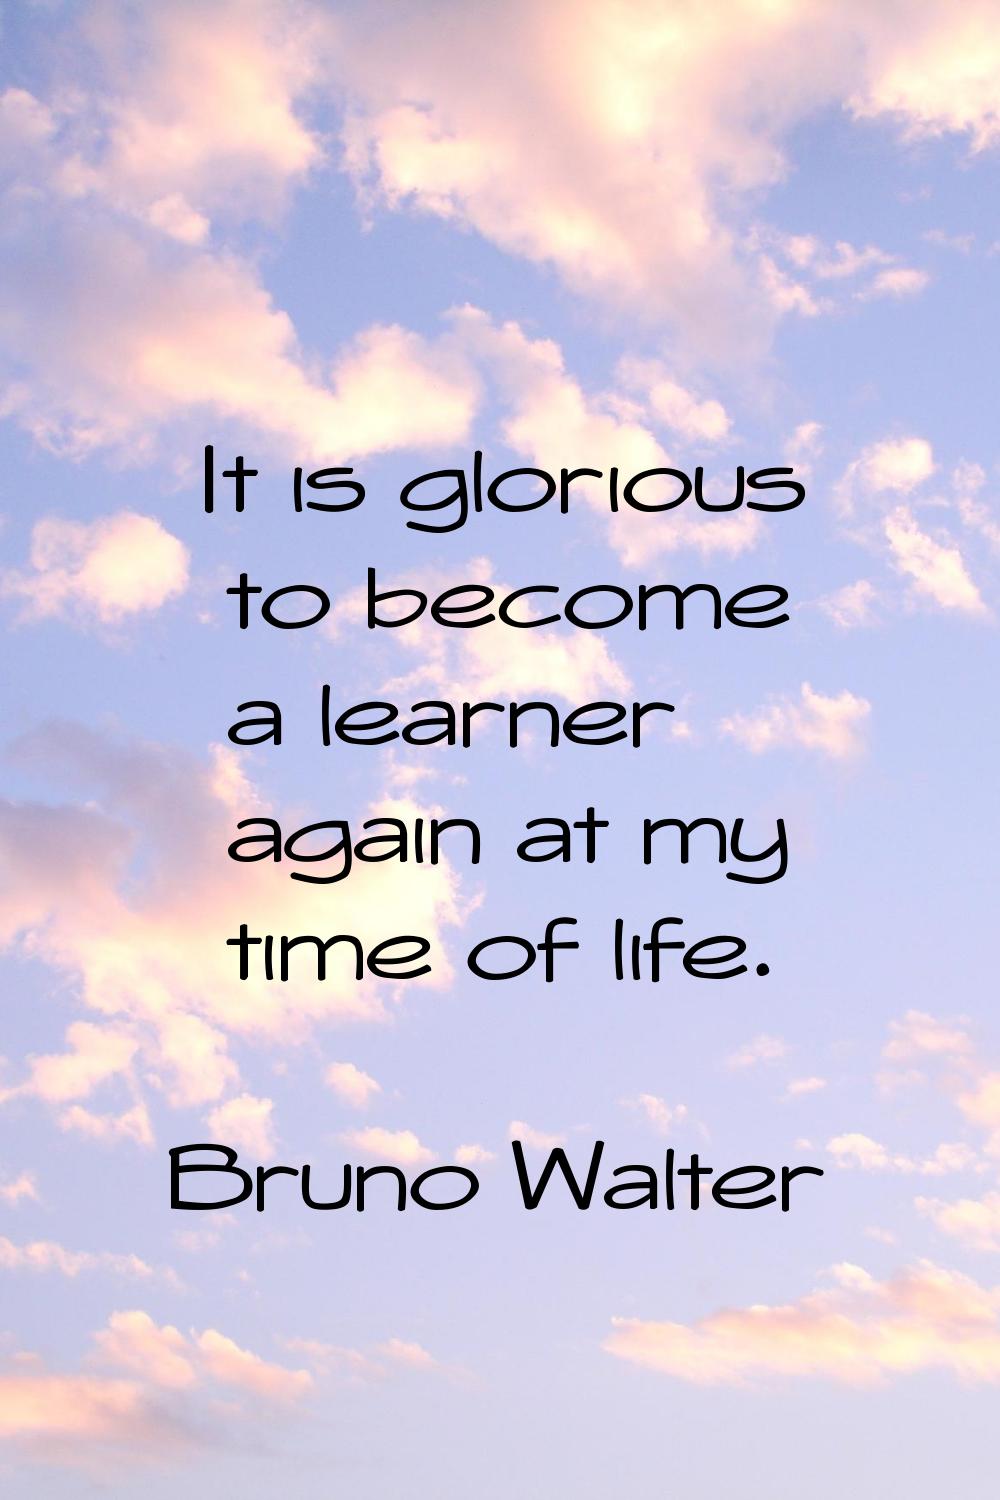 It is glorious to become a learner again at my time of life.